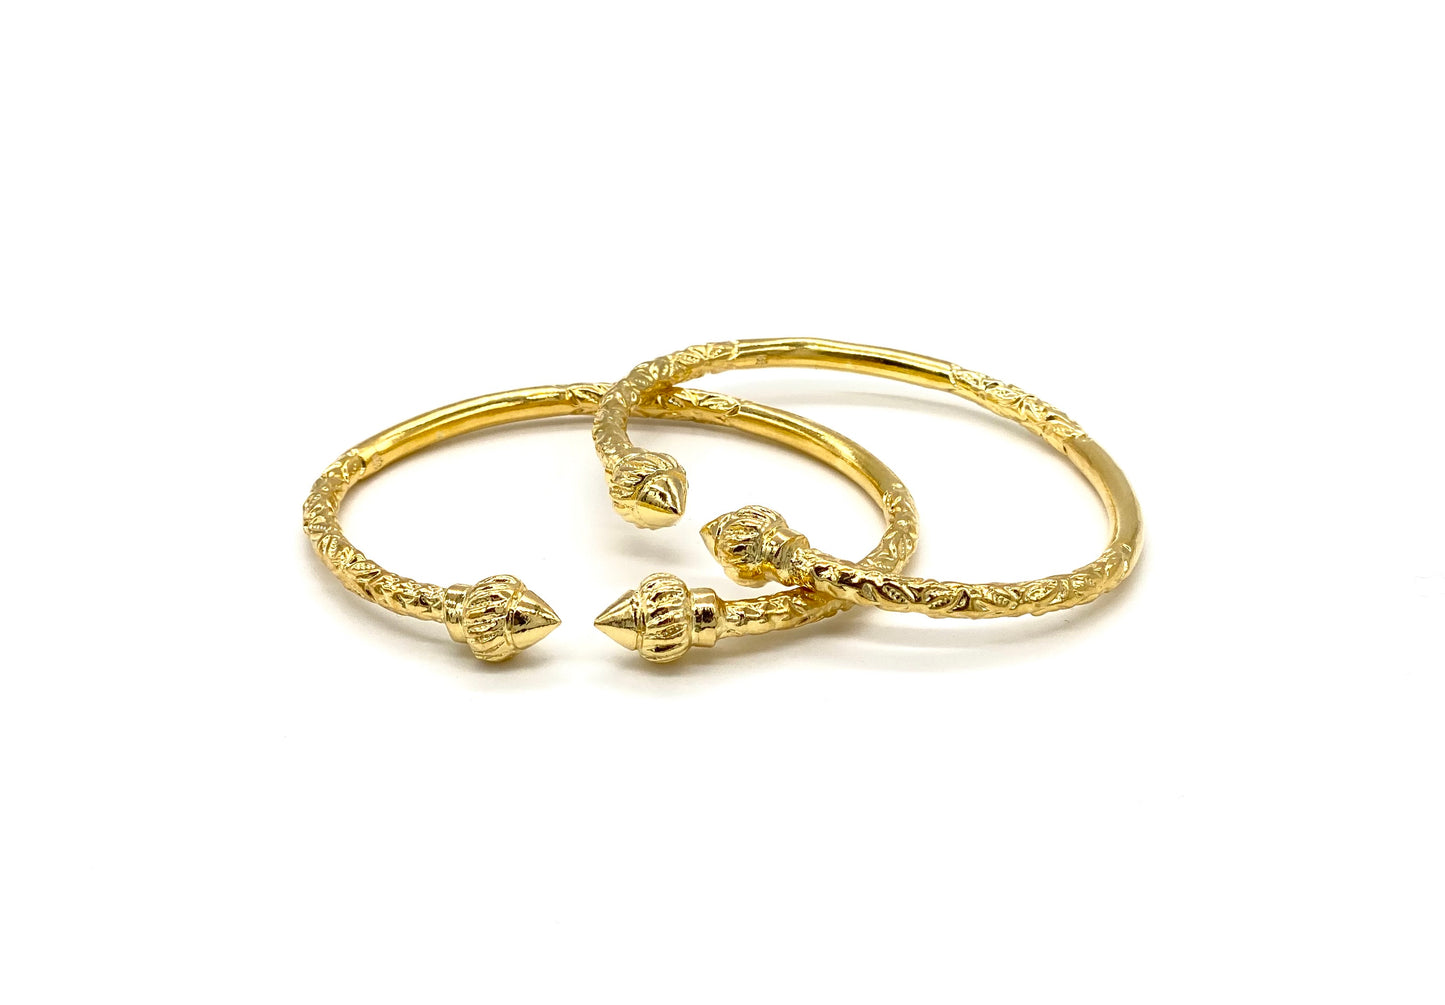 Better Jewelry Solid .925 Sterling Silver Ridged Arrow Taj Mahal Ends West Indian Bangles Plated with 14K Gold, 1 pair